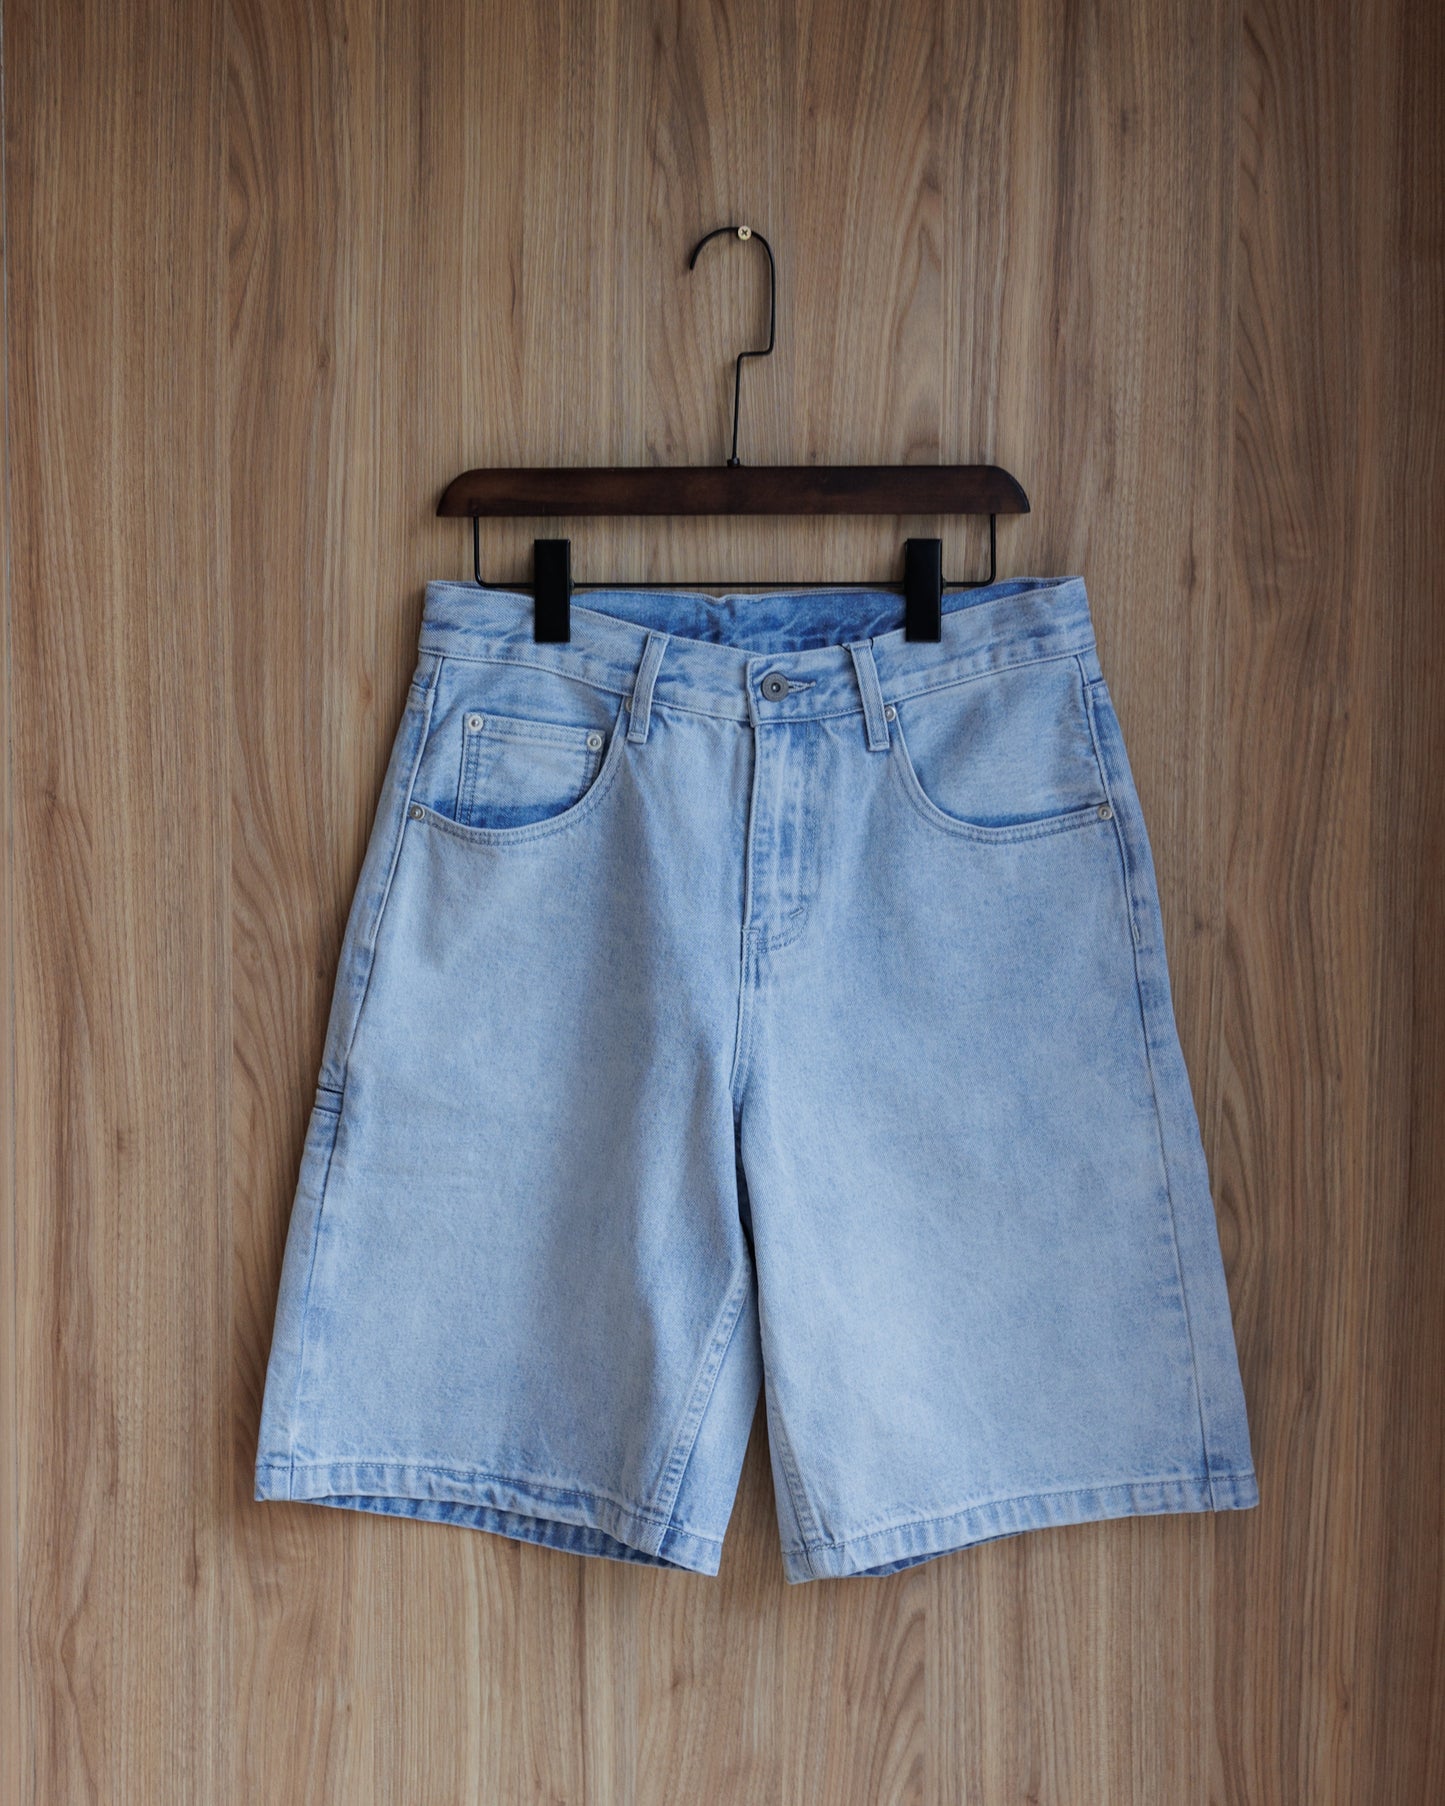 A.O.P Normal Washed Jorts